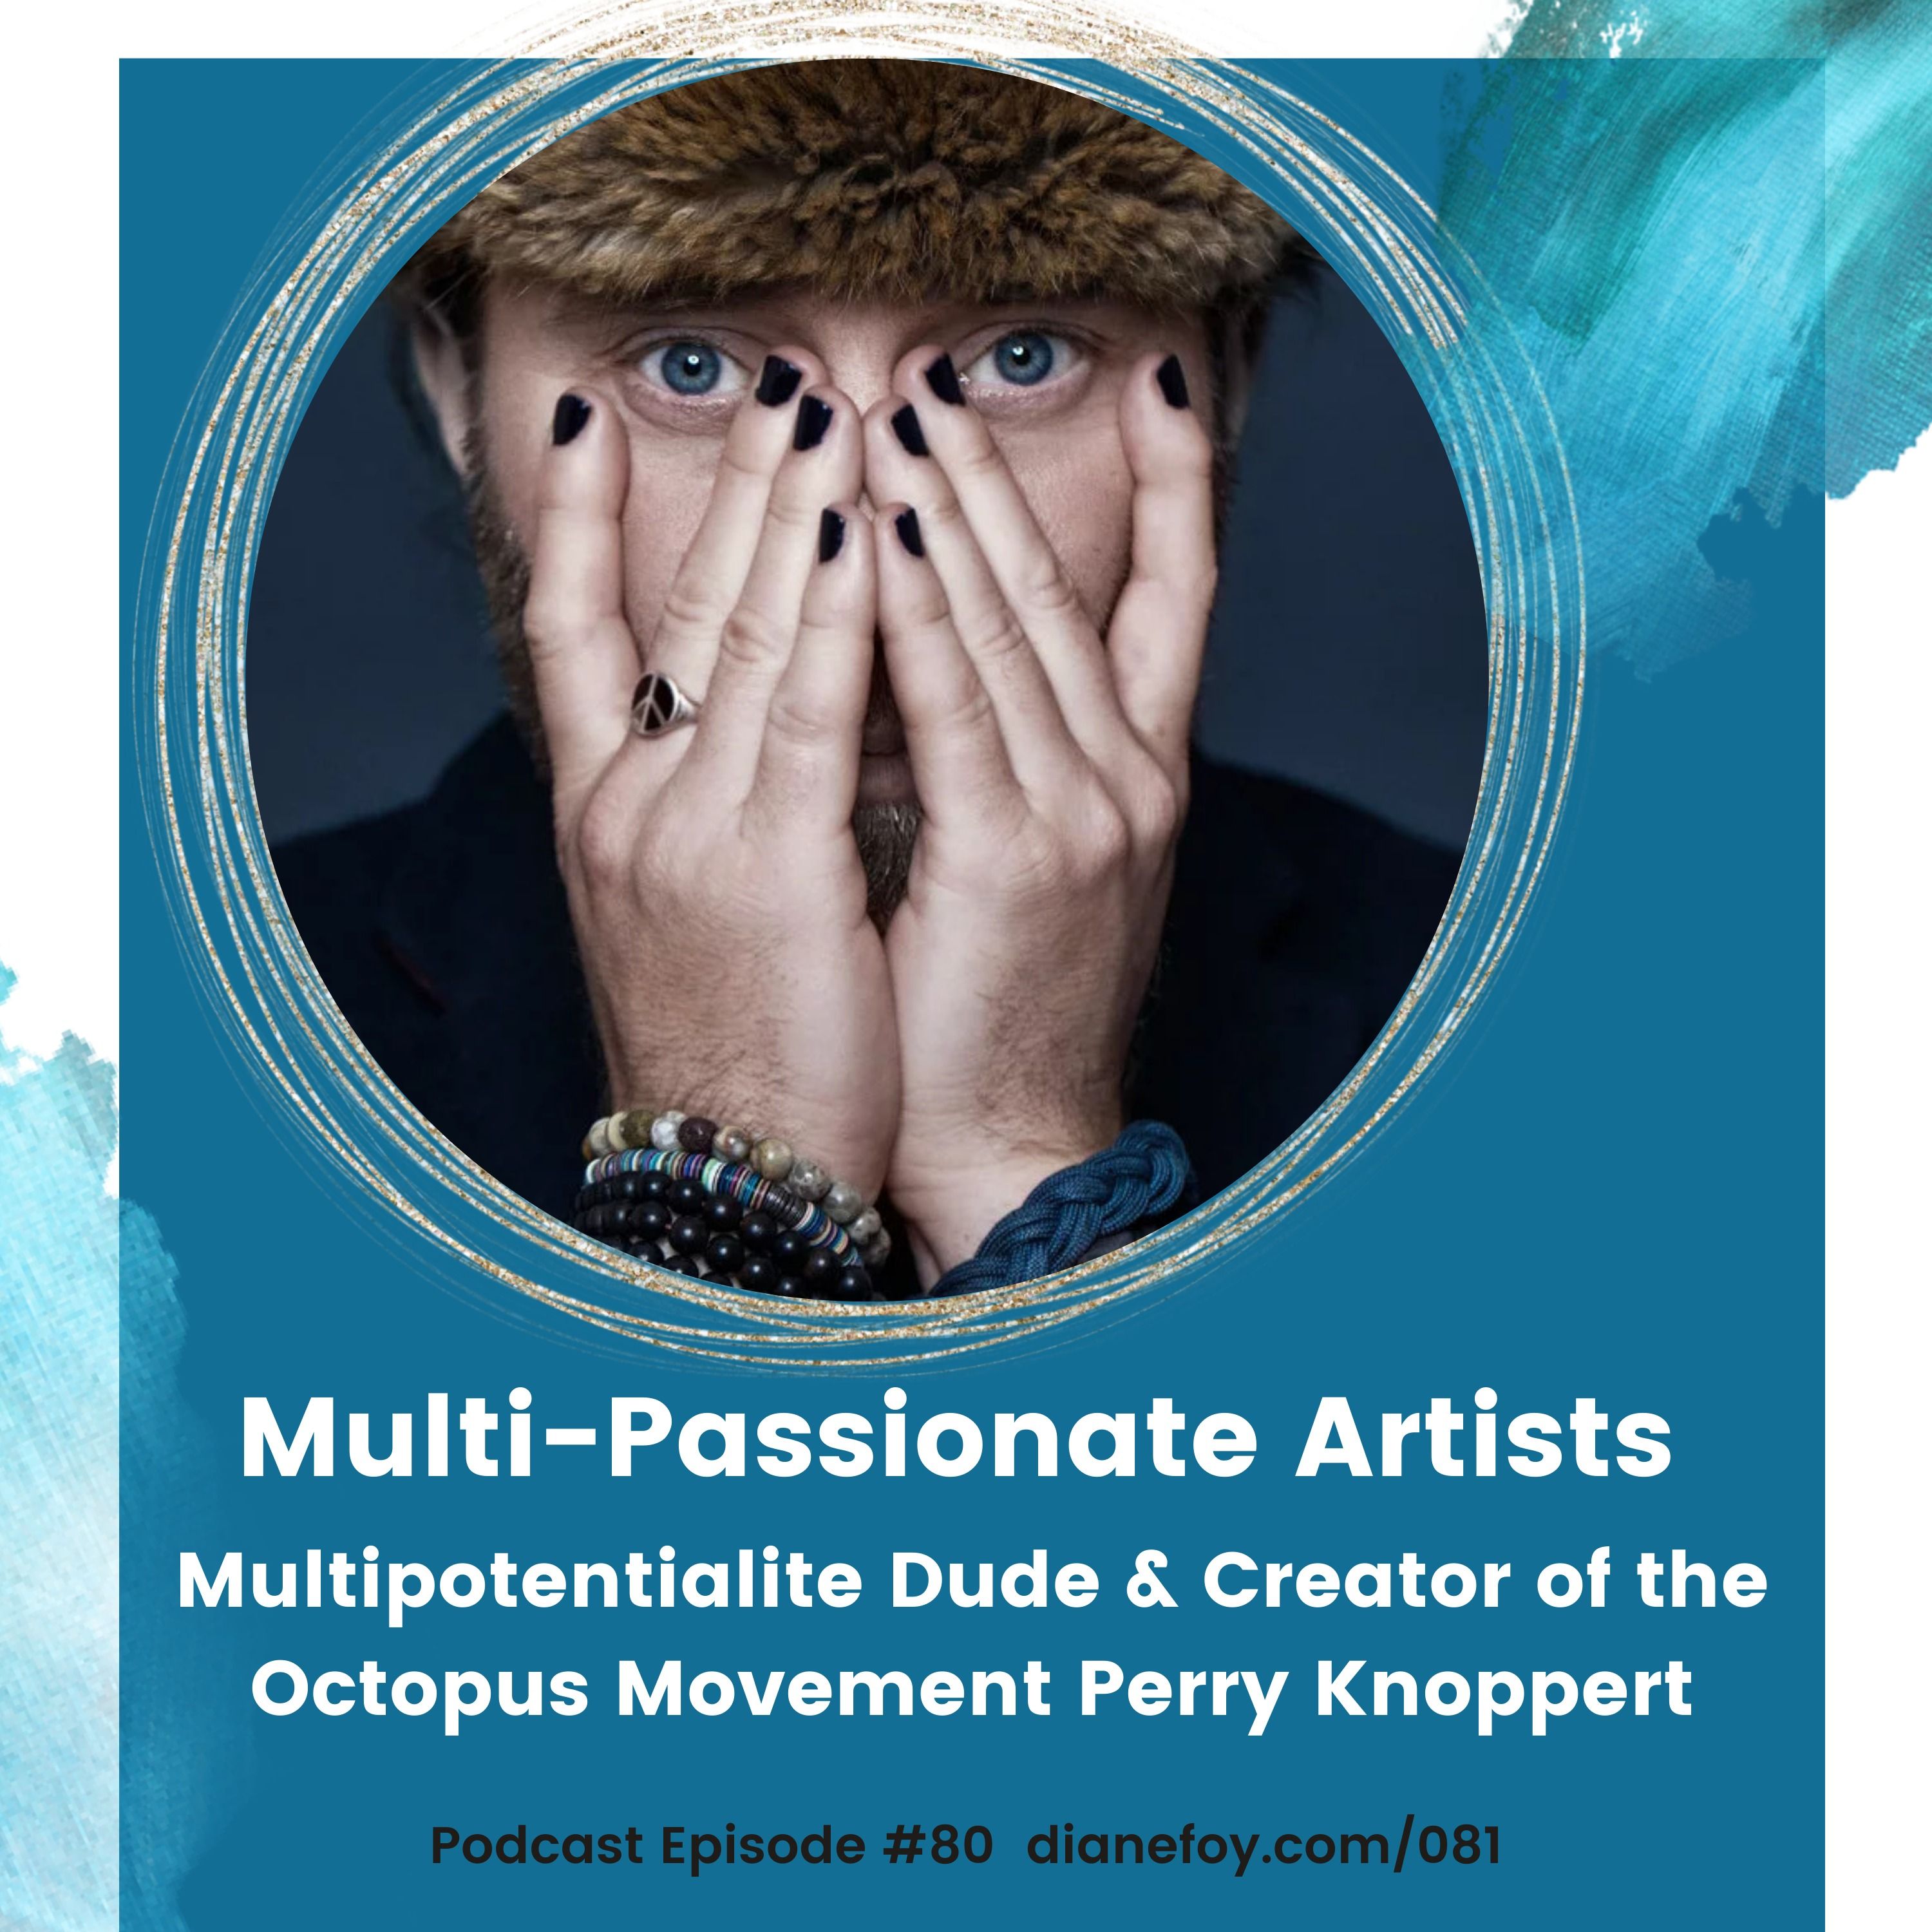 Multipotentialite Dude & Creator of the Octopus Movement Perry Knoppert